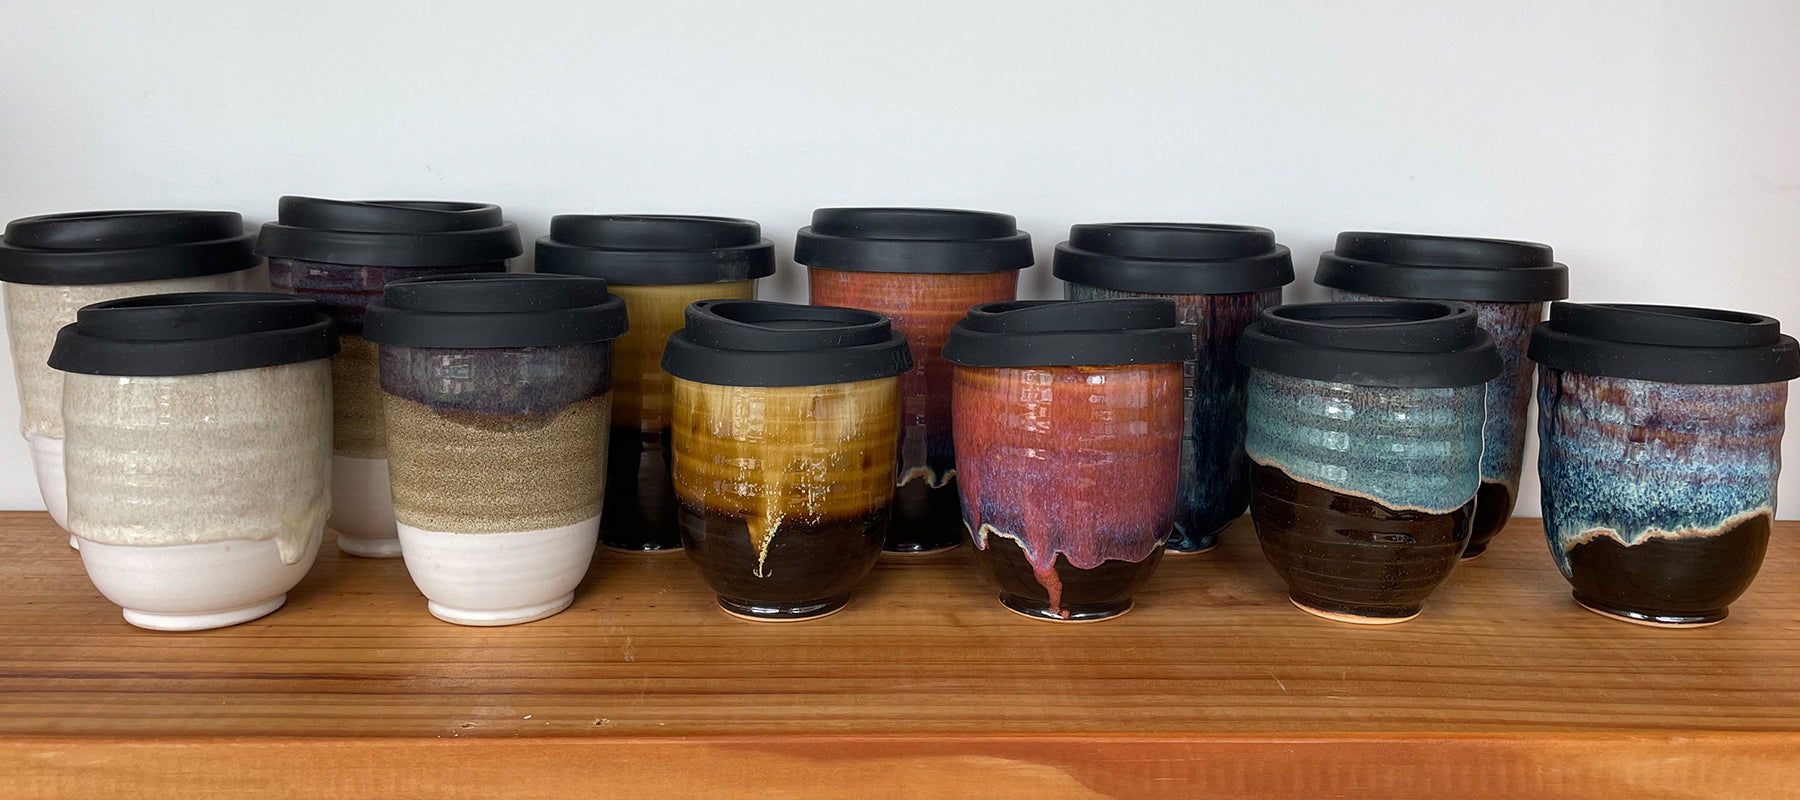 West Coast Stoneware online at The Coffee Collective